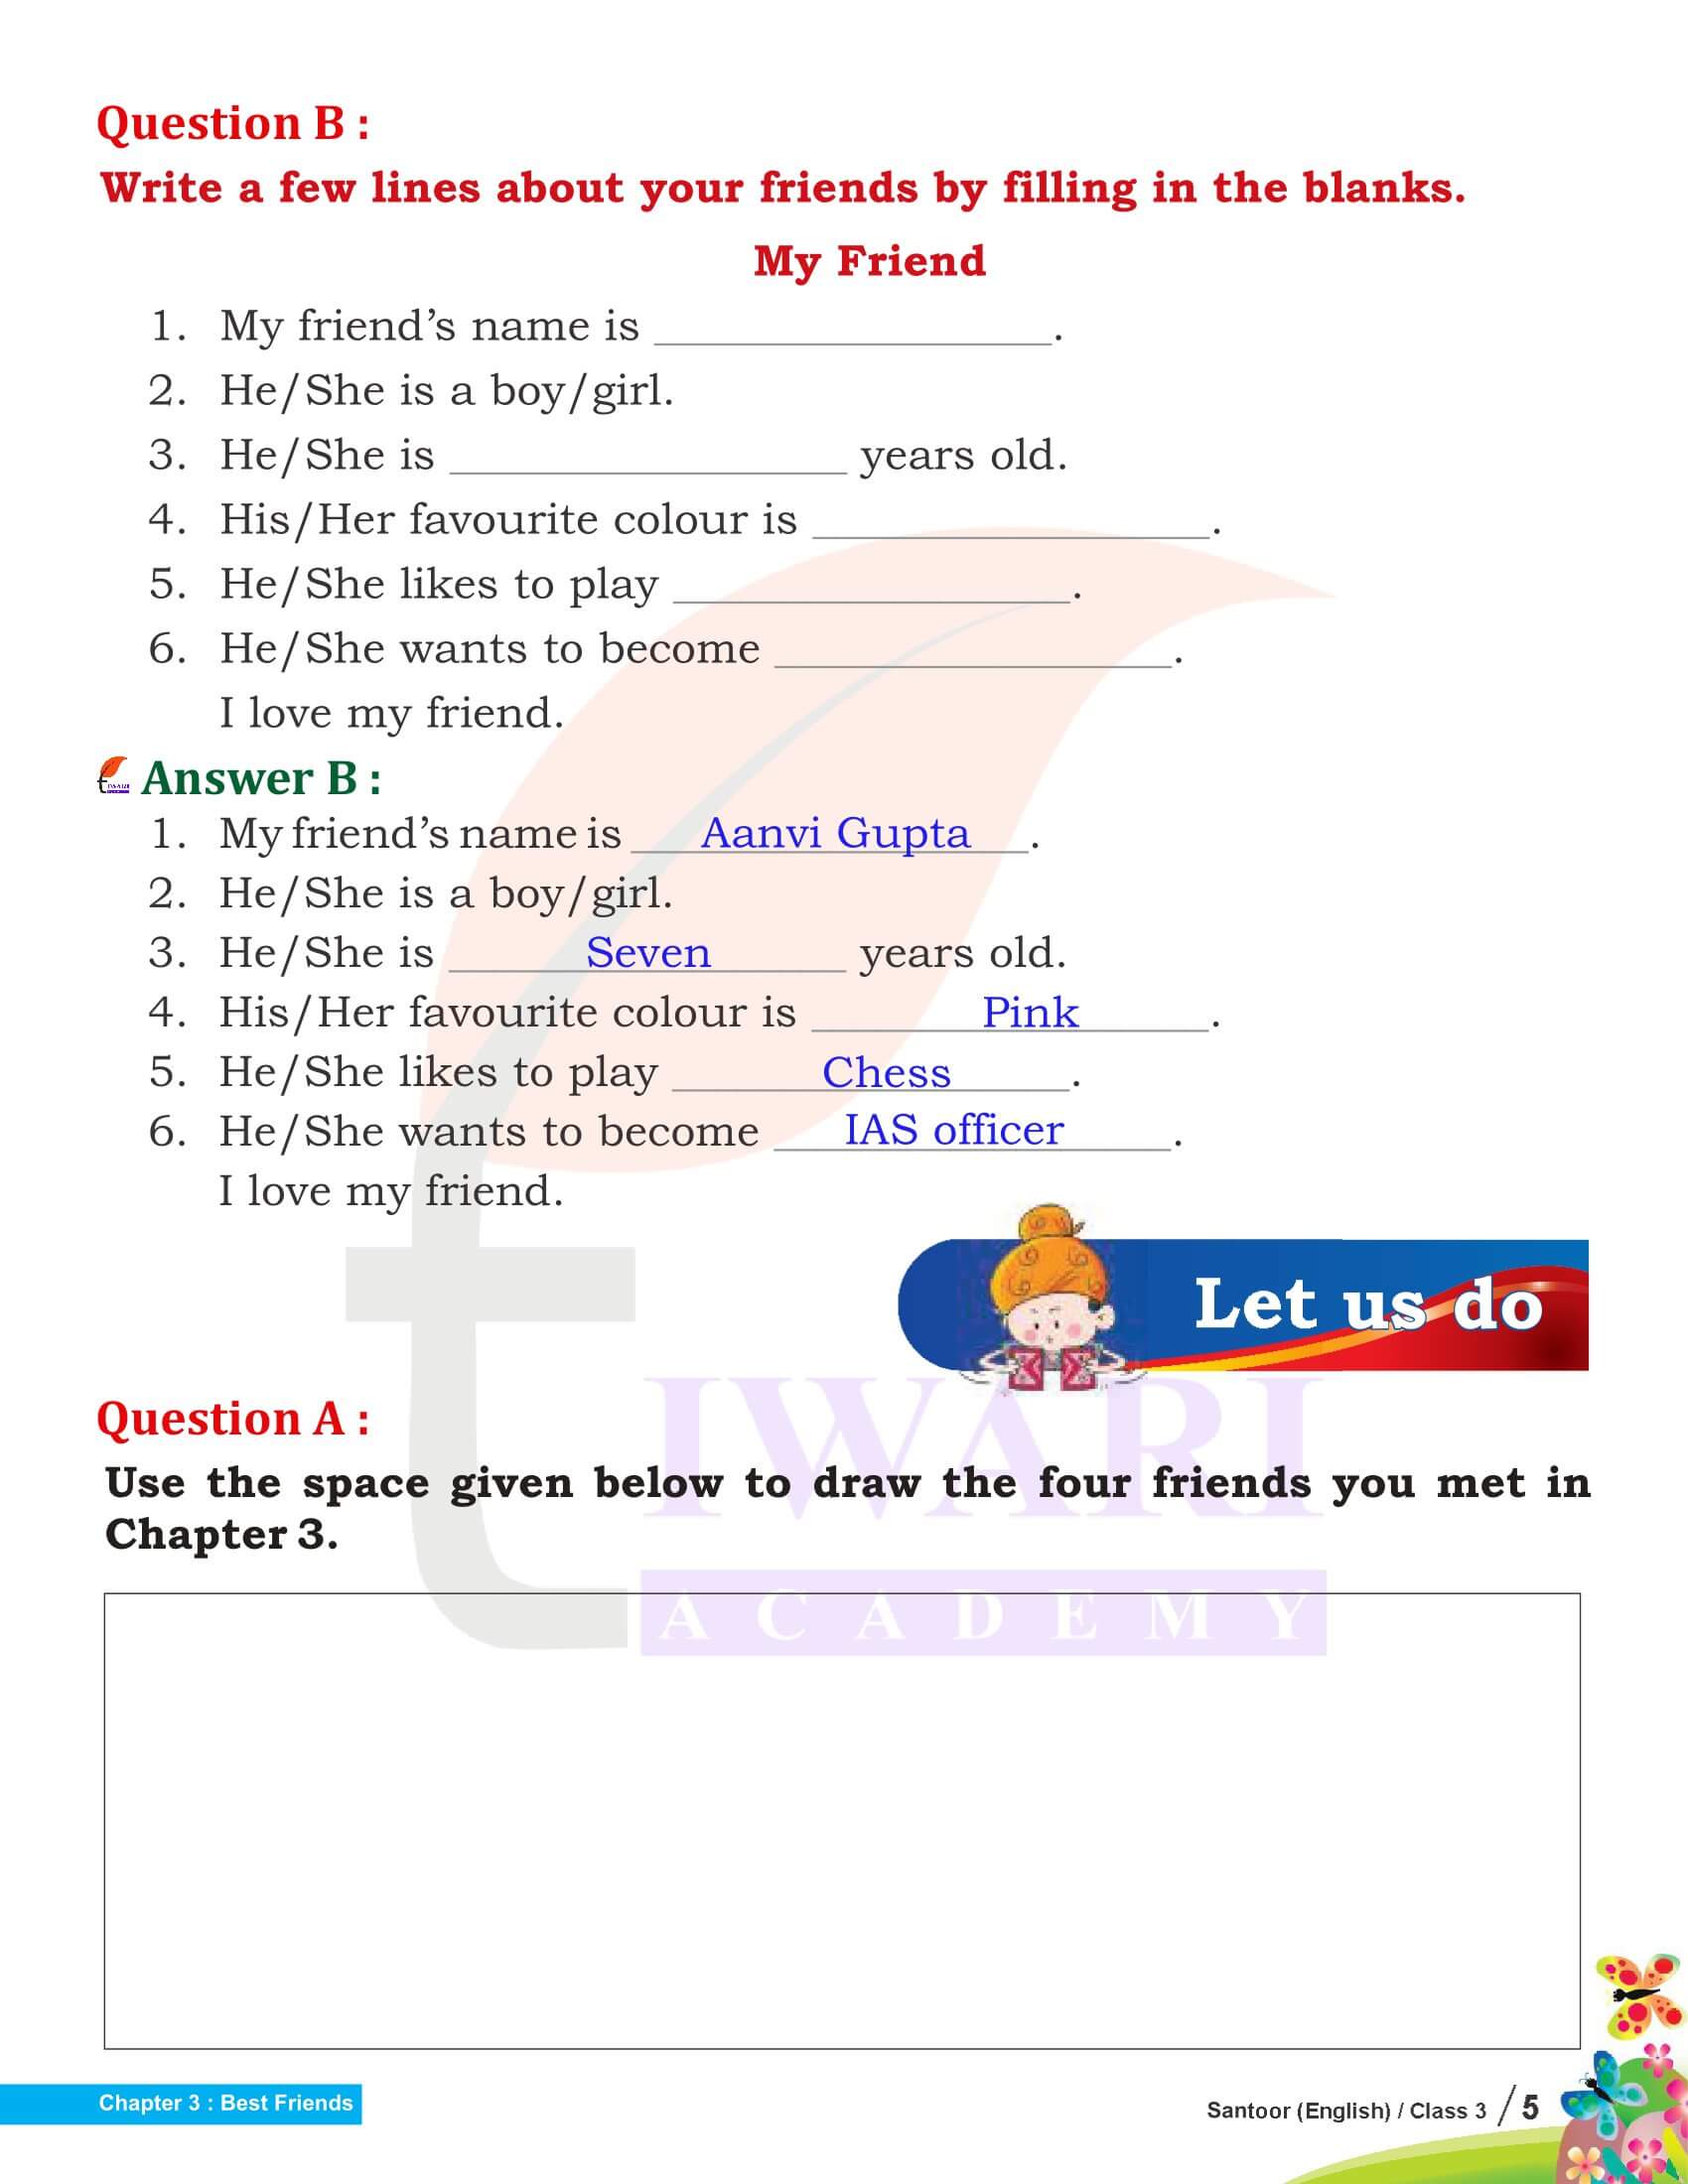 NCERT Solutions for Class 3 English Santoor Chapter 3 Best Friends Question Answers